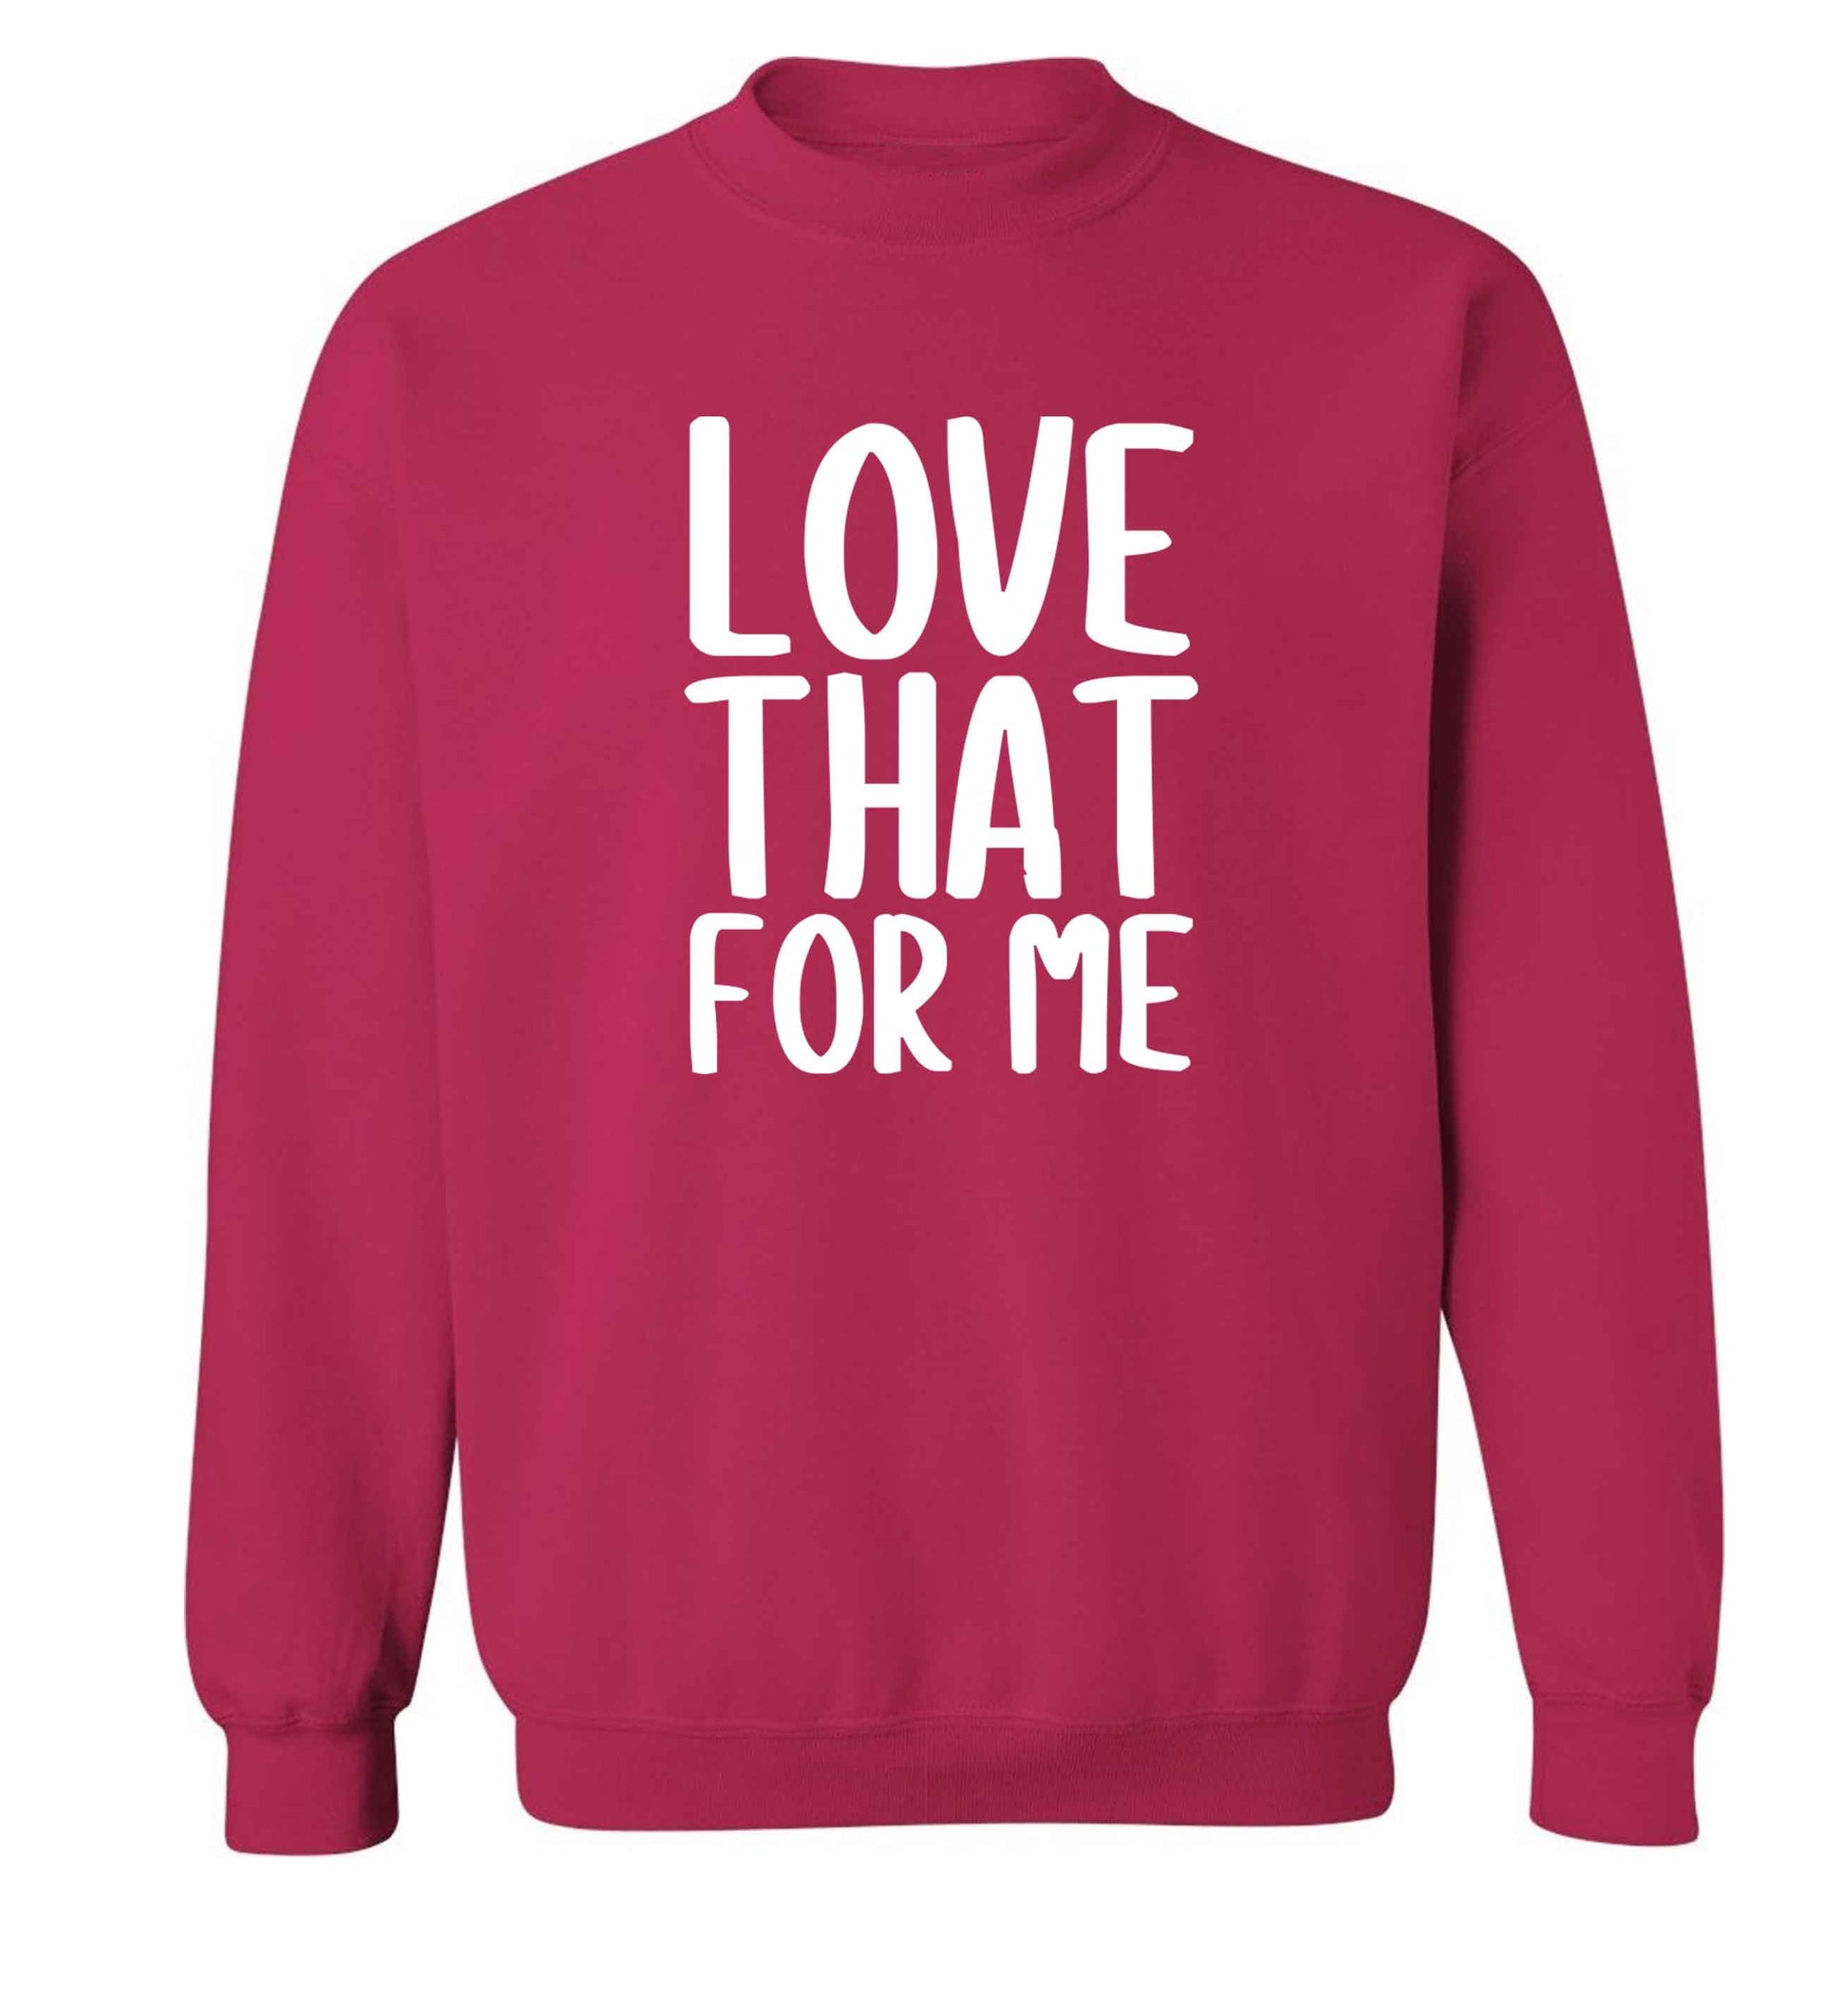 We love this for YOU! Who else loves saying this?!  adult's unisex pink sweater 2XL